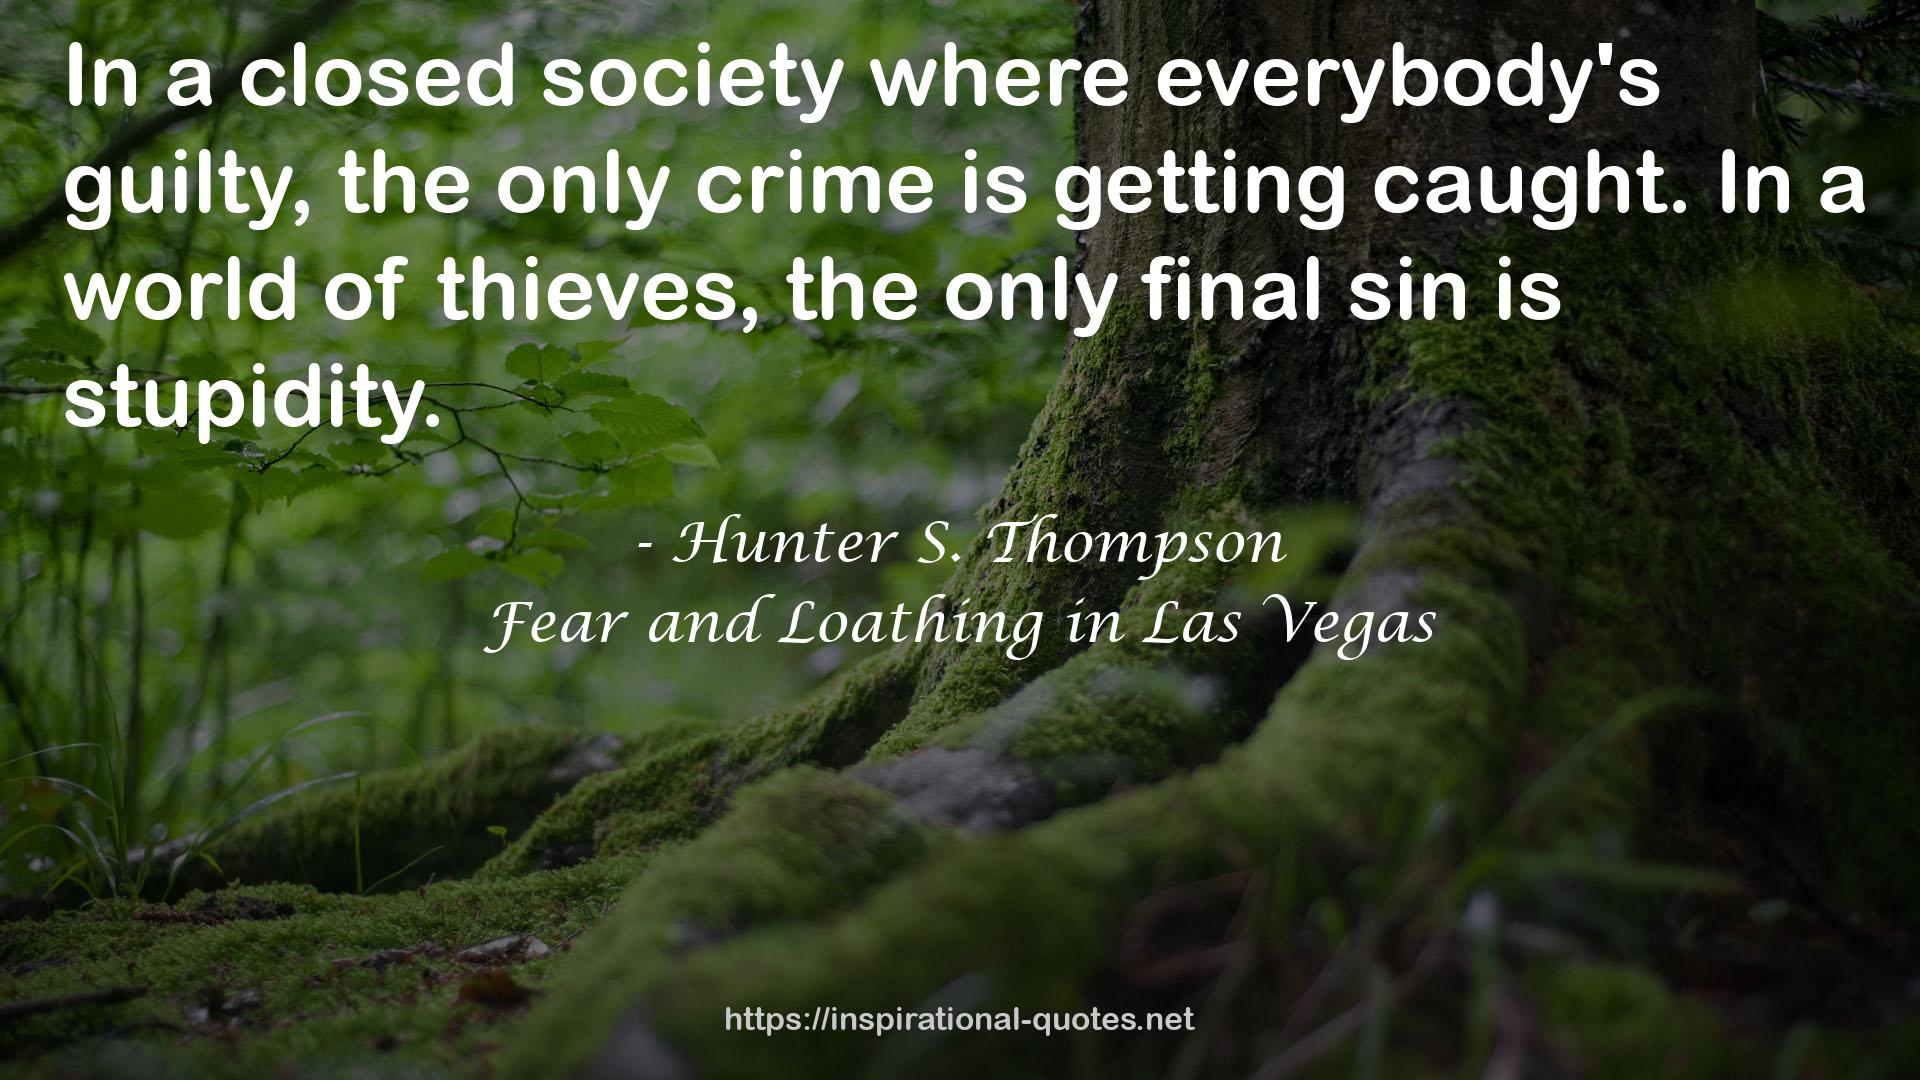 a closed society  QUOTES